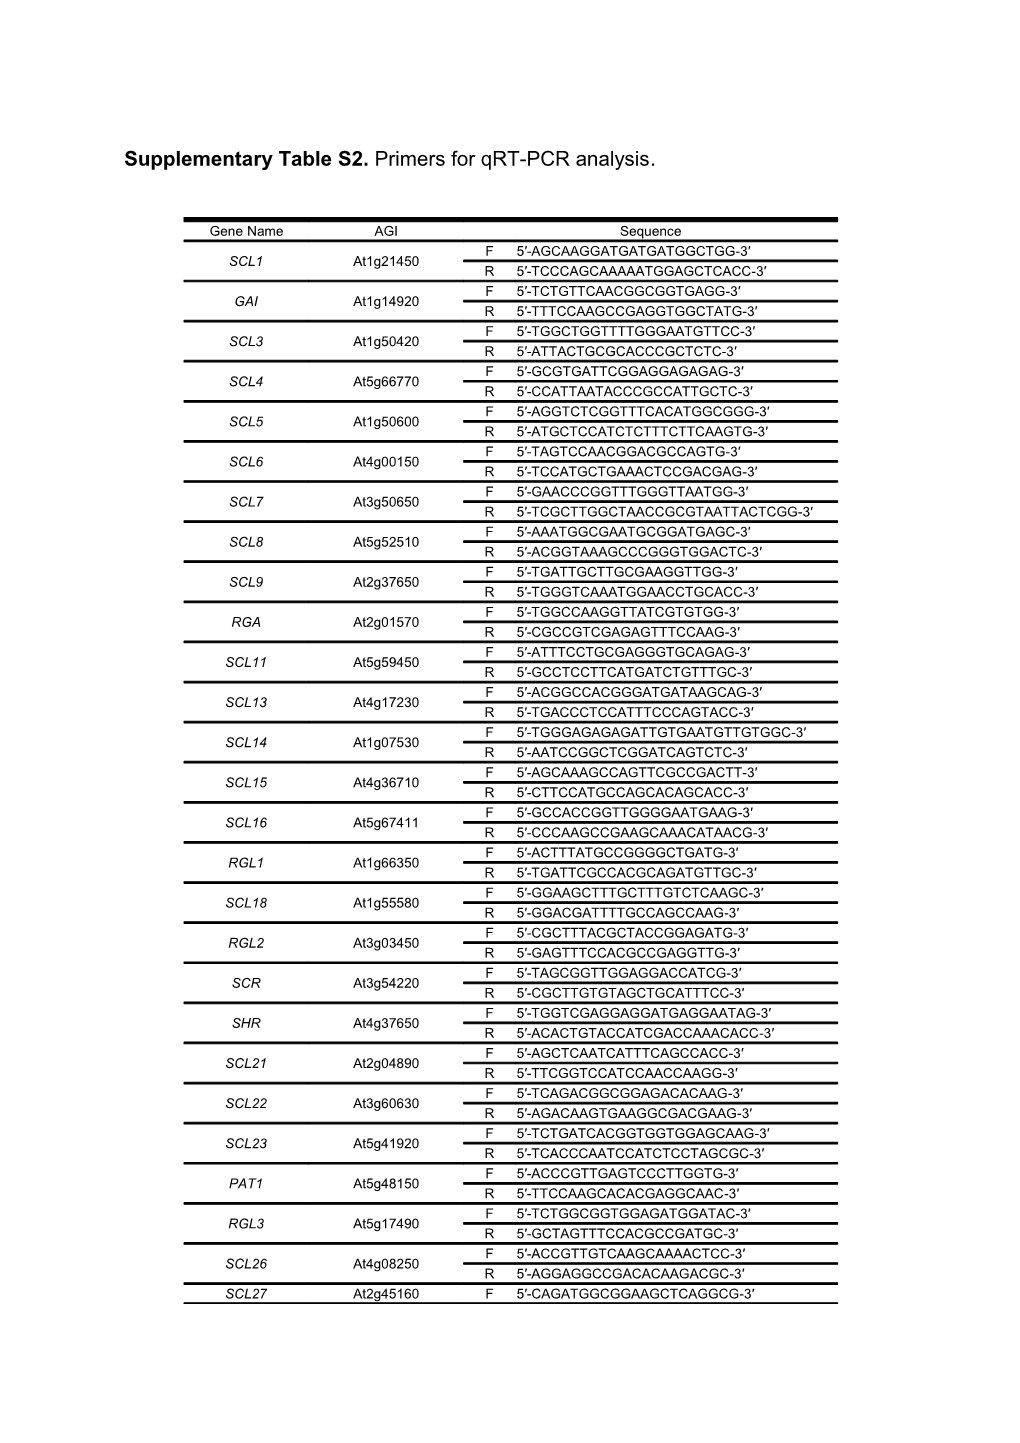 Supplementary Table S2. Primers for Qrt-PCR Analysis